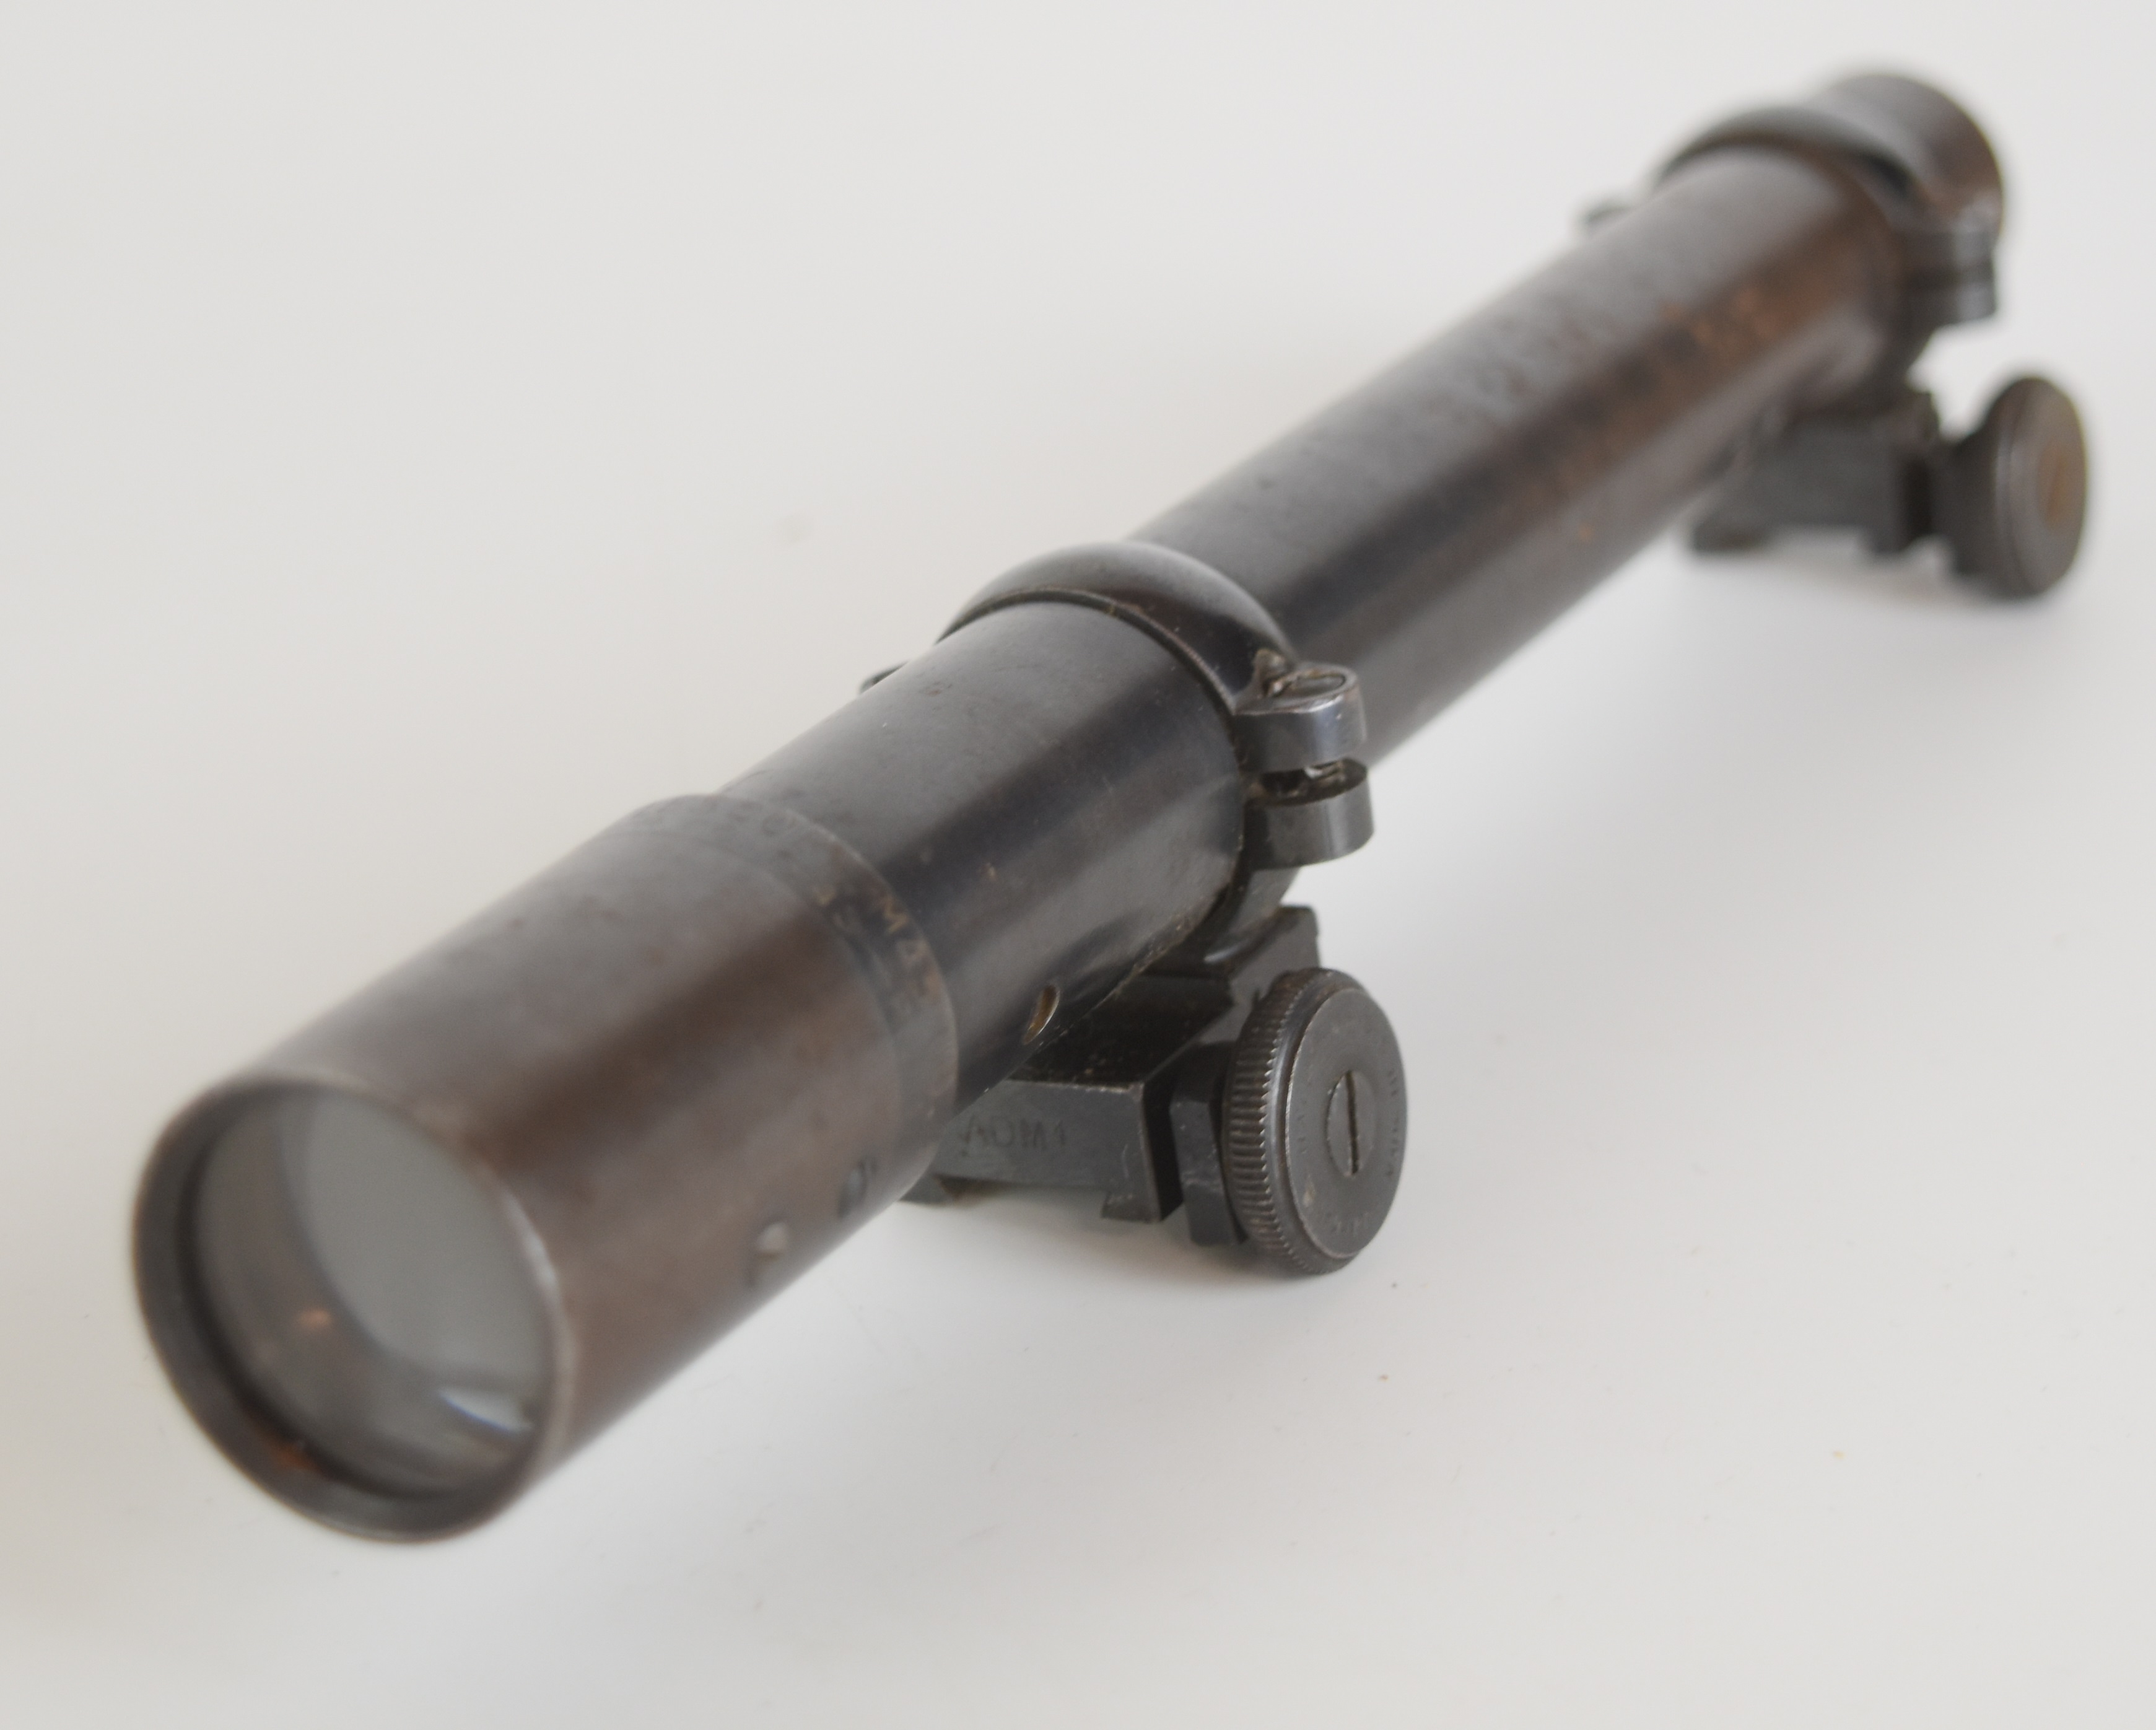 WW2 MHR Co M45 sniper rifle scope marked 'Telescope M45 No 1294 M.H.R. Co 1943 - RJD' with Parker- - Image 3 of 3